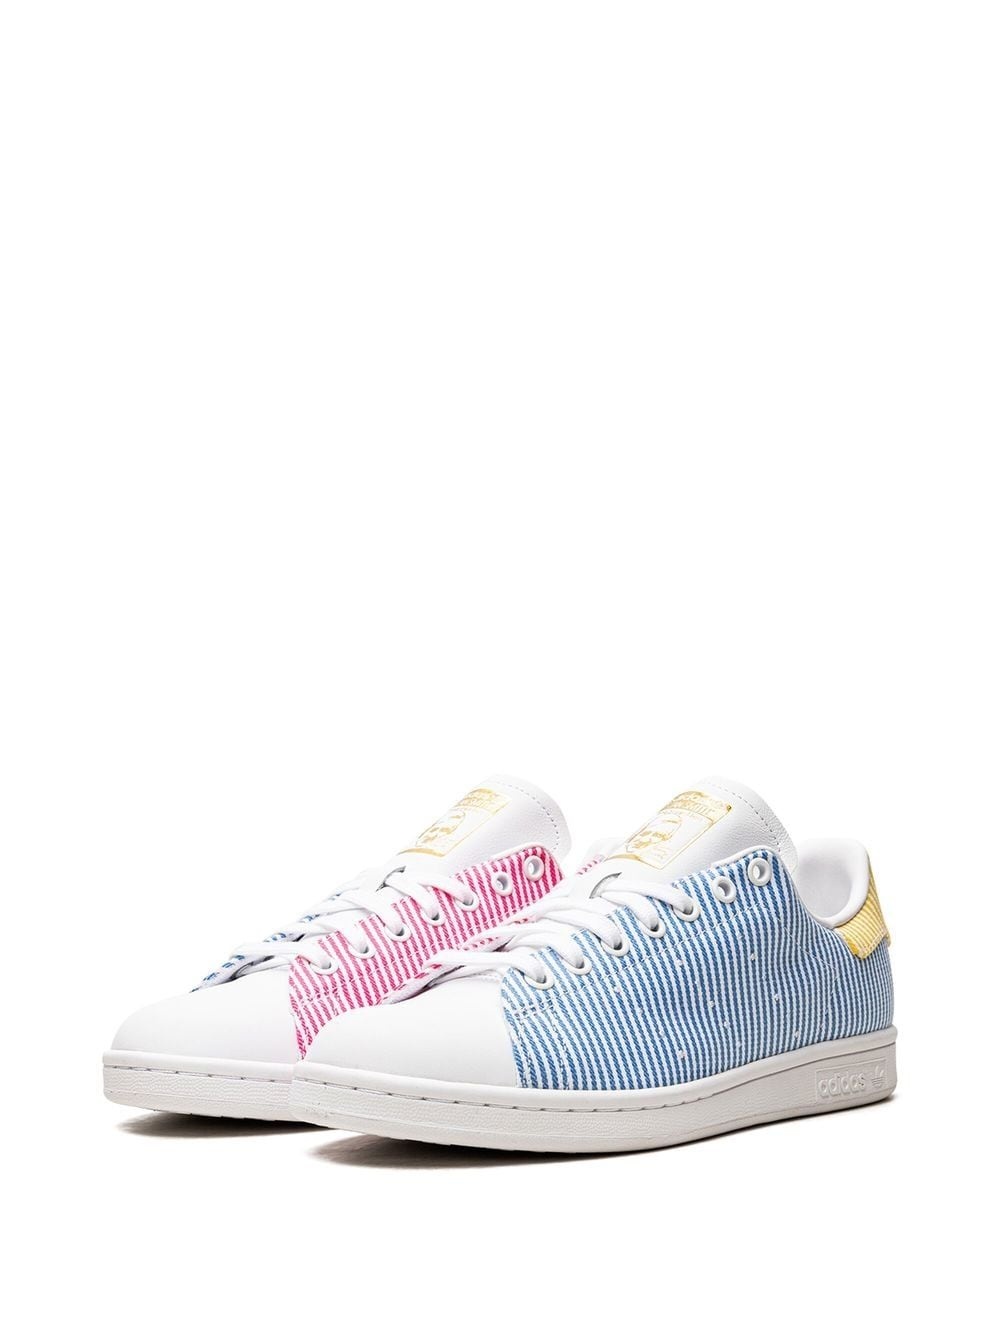 Stan Smith "Pride 2020" sneakers - 5